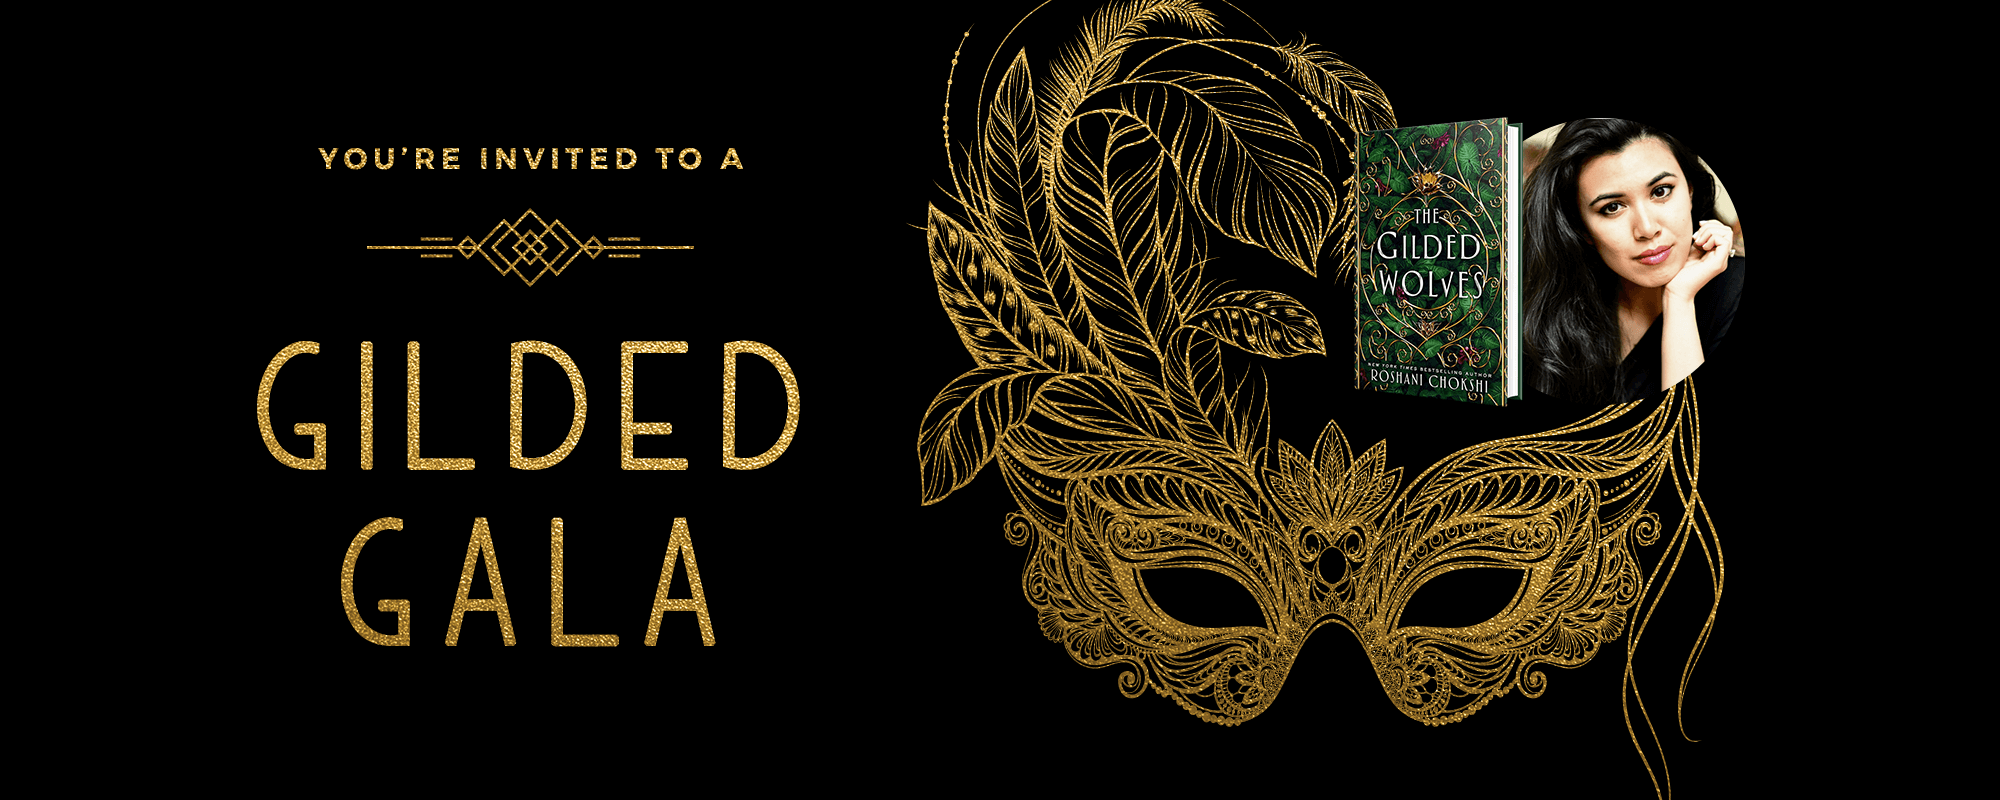 you're invited to a gilded gala